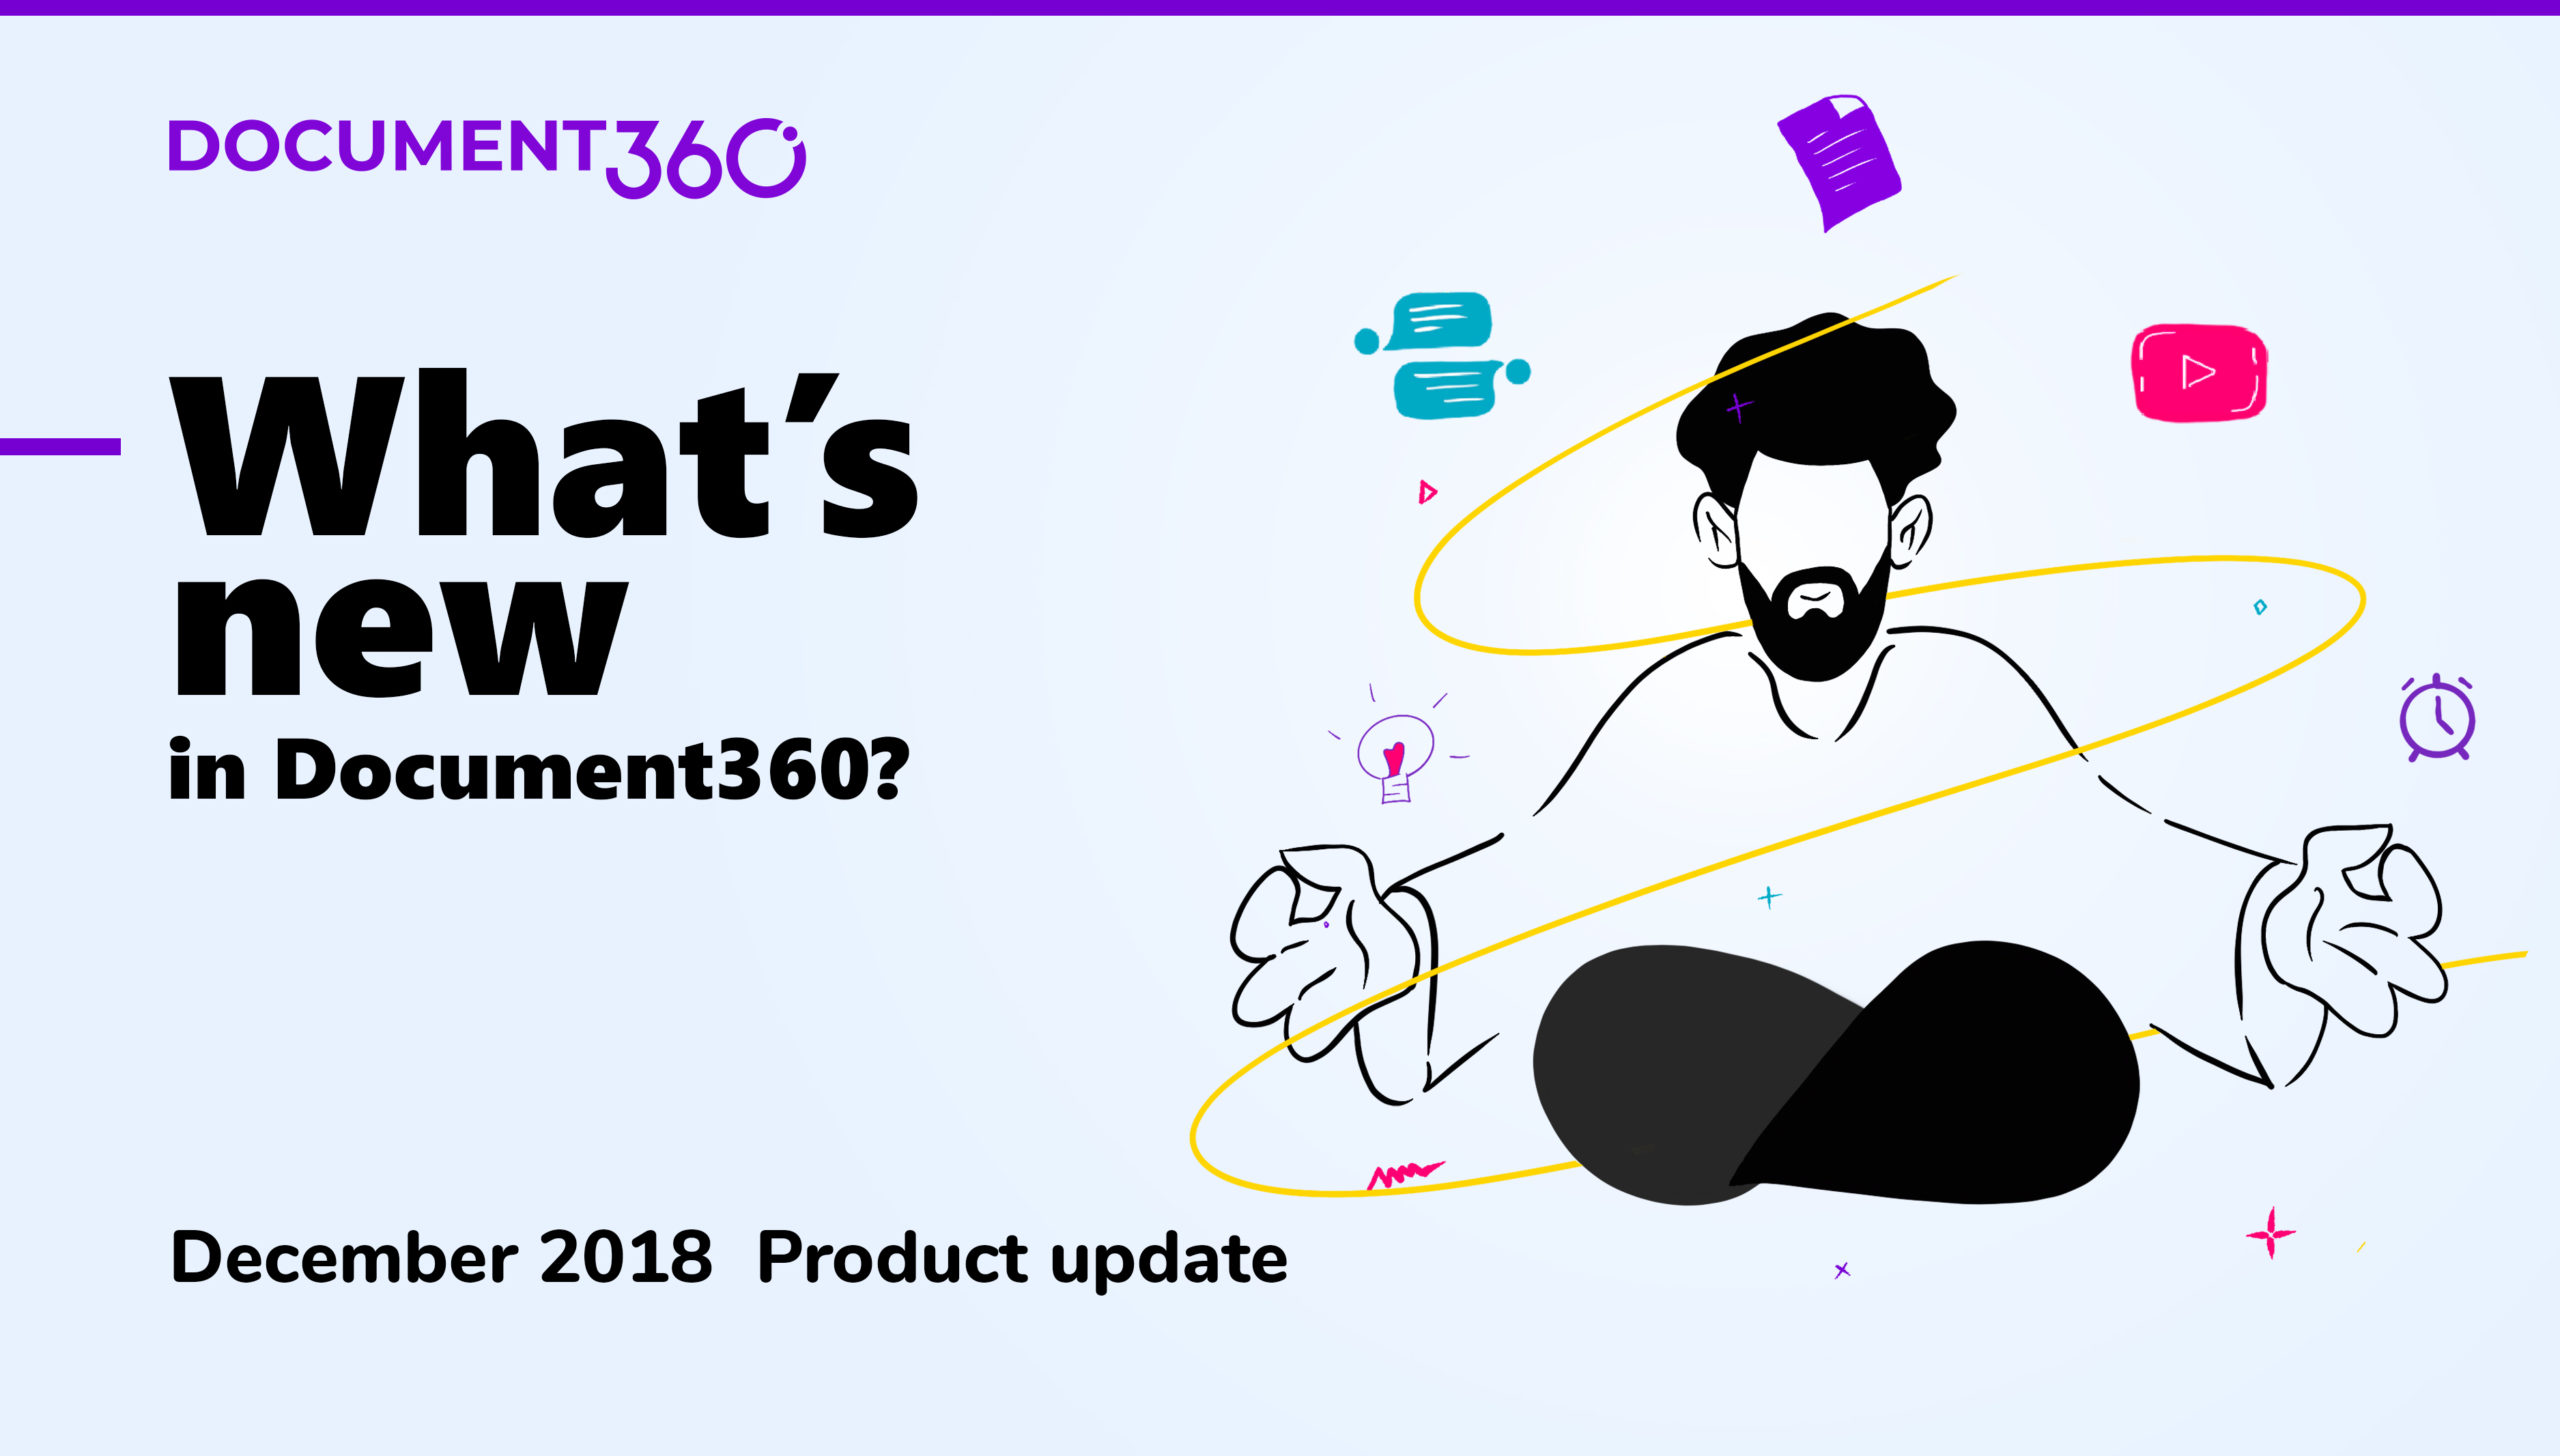 December Product update - Document360